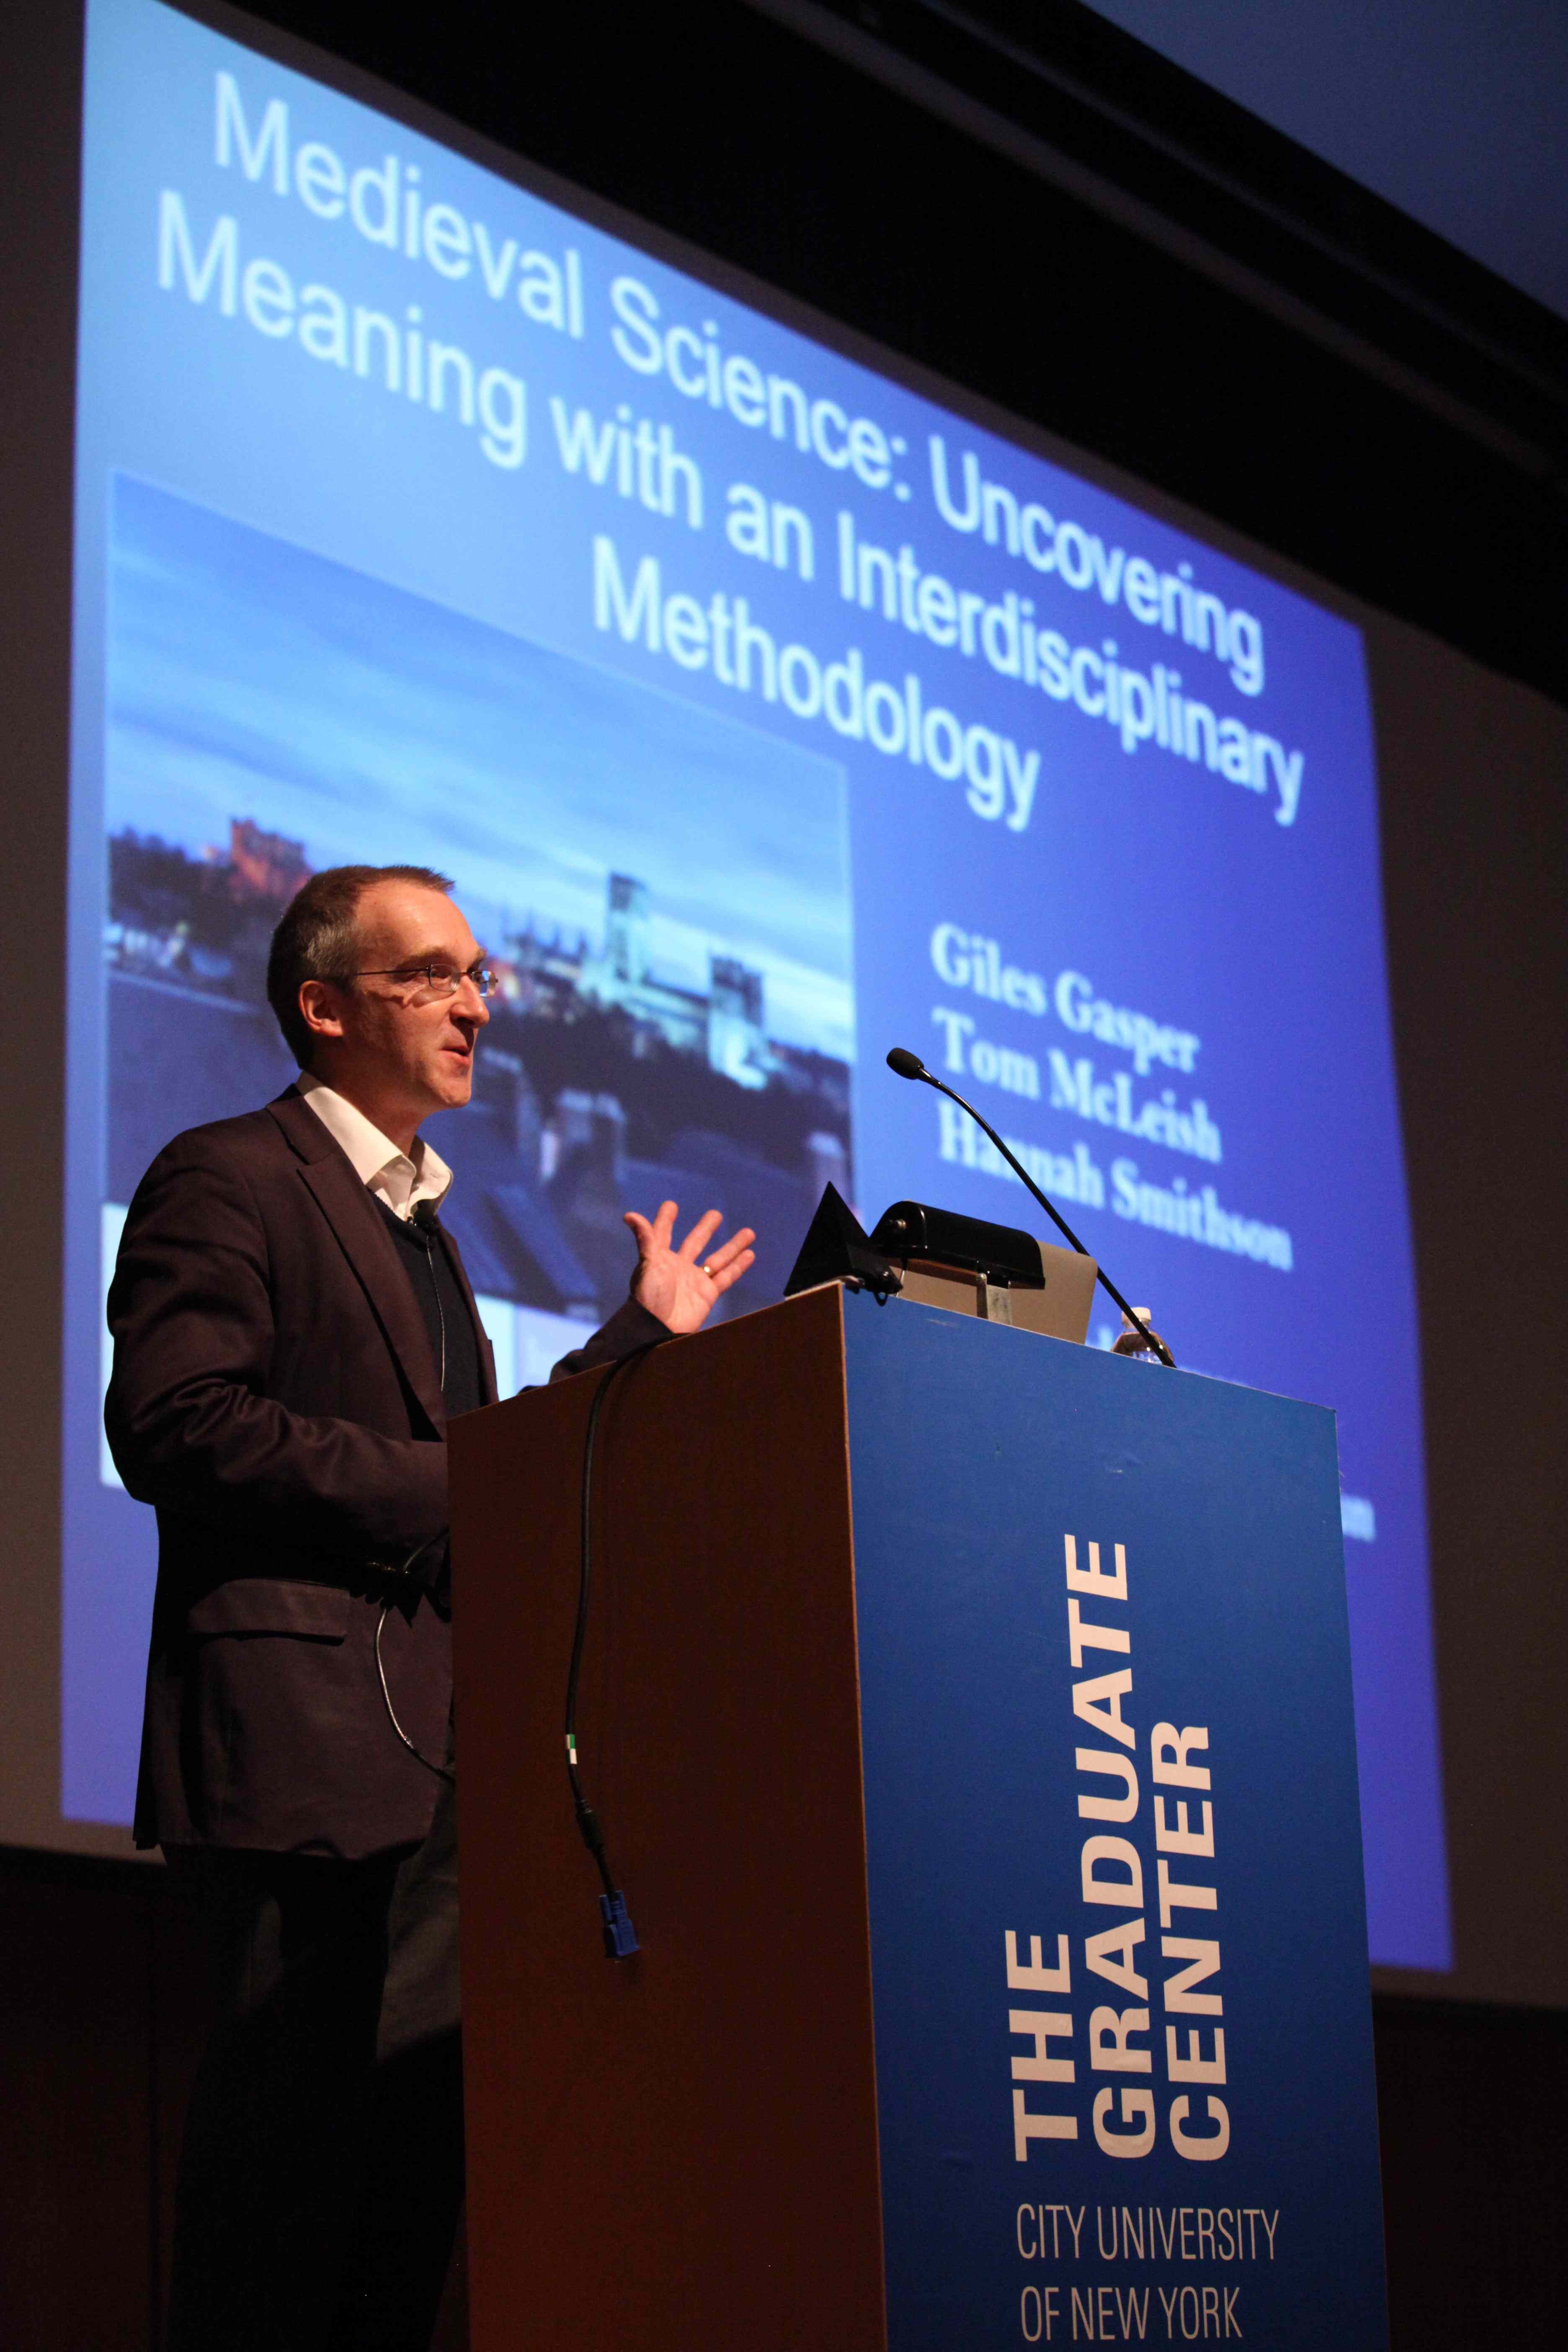 Professor Tom McLeish giving a lecture at City University New York